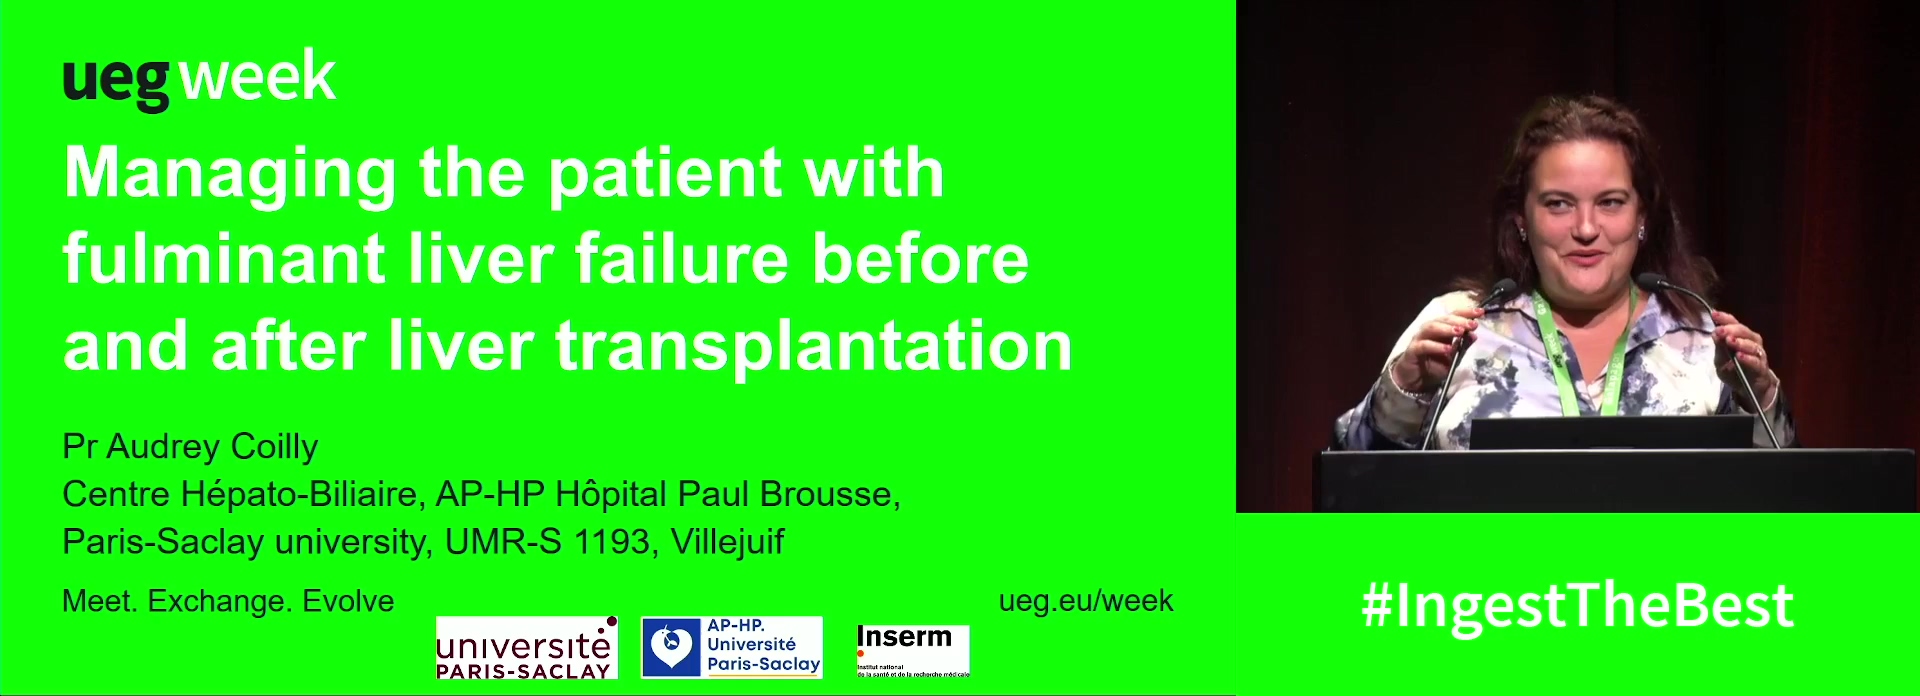 Managing the patient with fulminant liver failure before and after liver transplantation